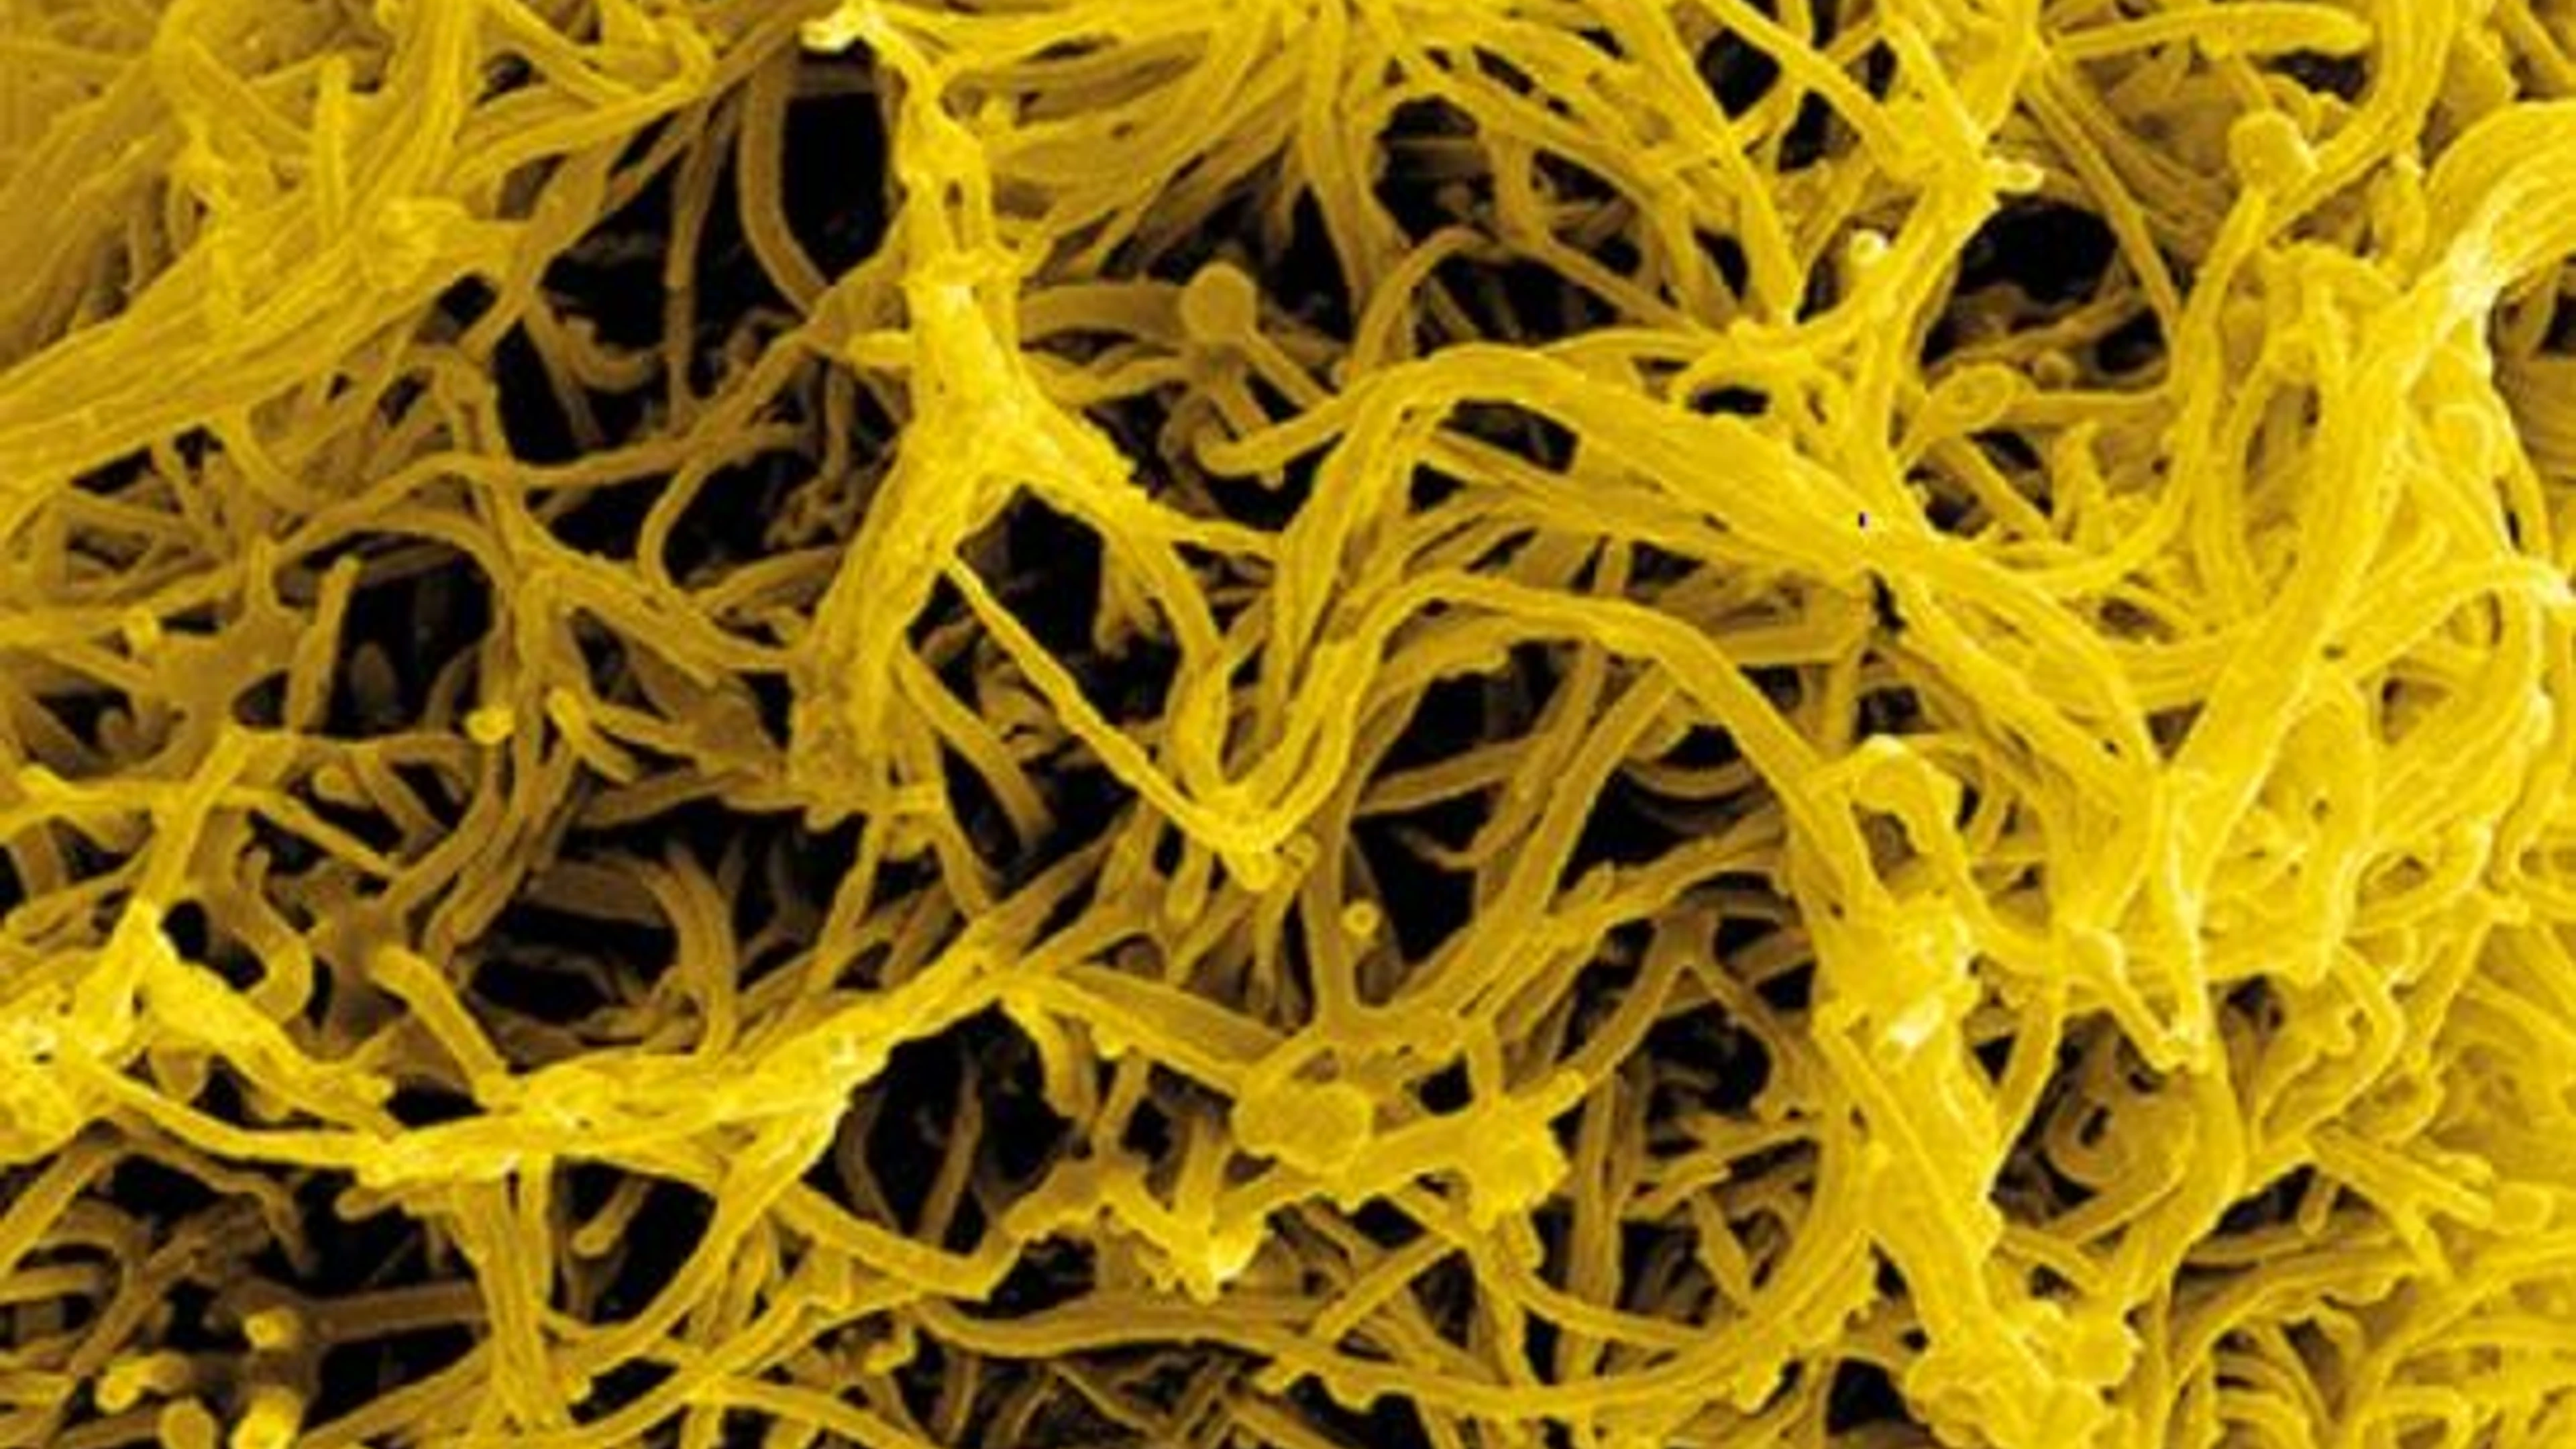 colourised scanning electron micrograph of filamentous ebola virus particles